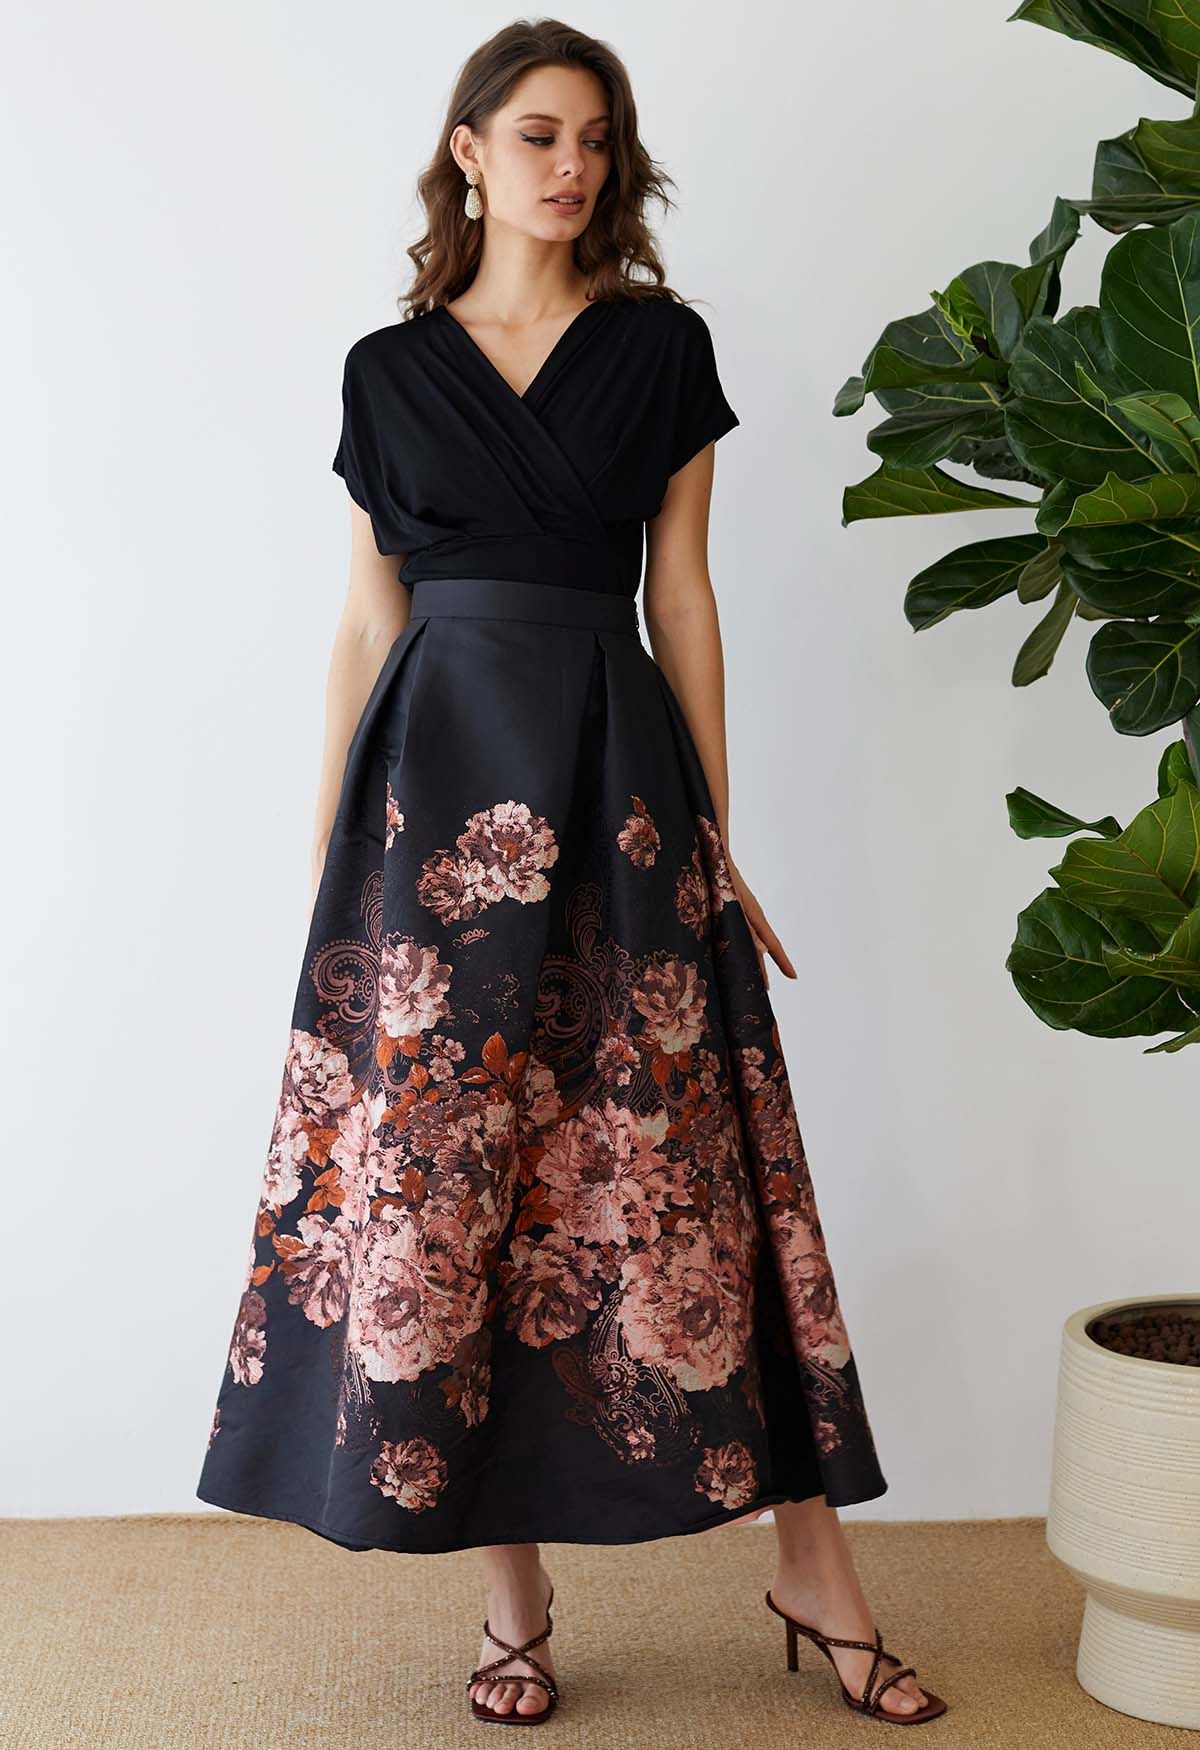 Bewitching Peony Jacquard Flare Skirt in Black